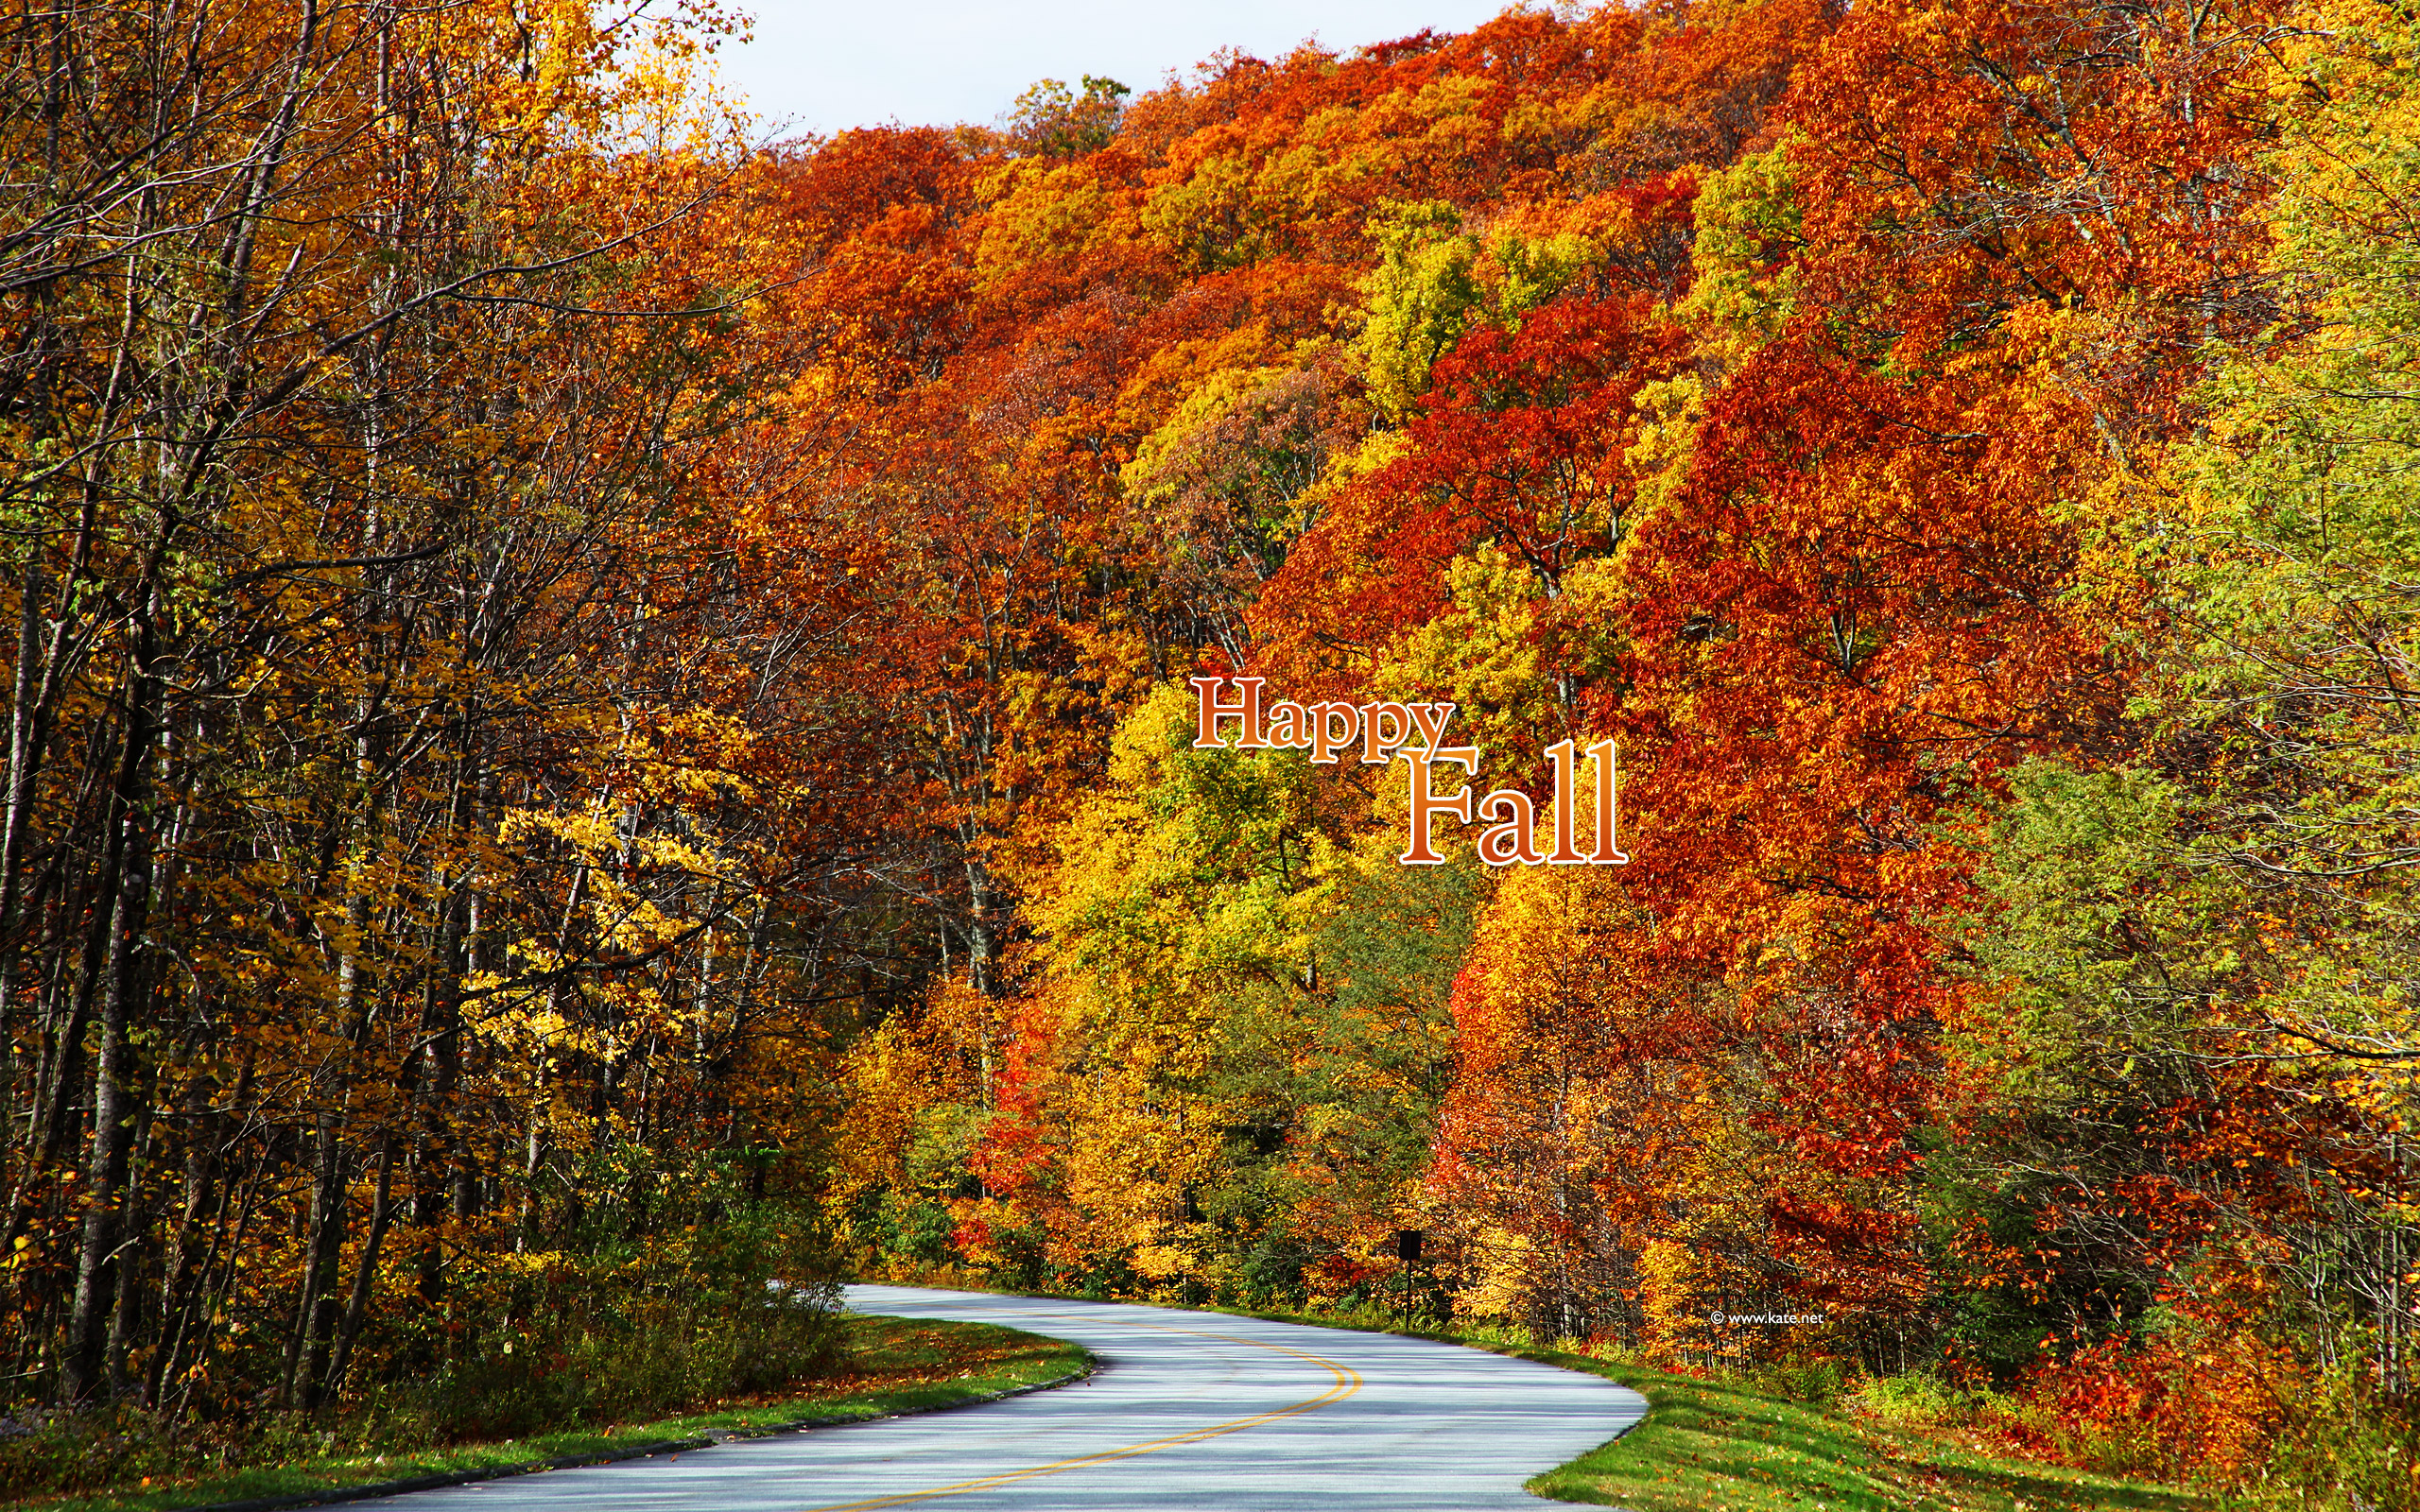 Gallery For gt Fall Foliage Wallpaper Ipad